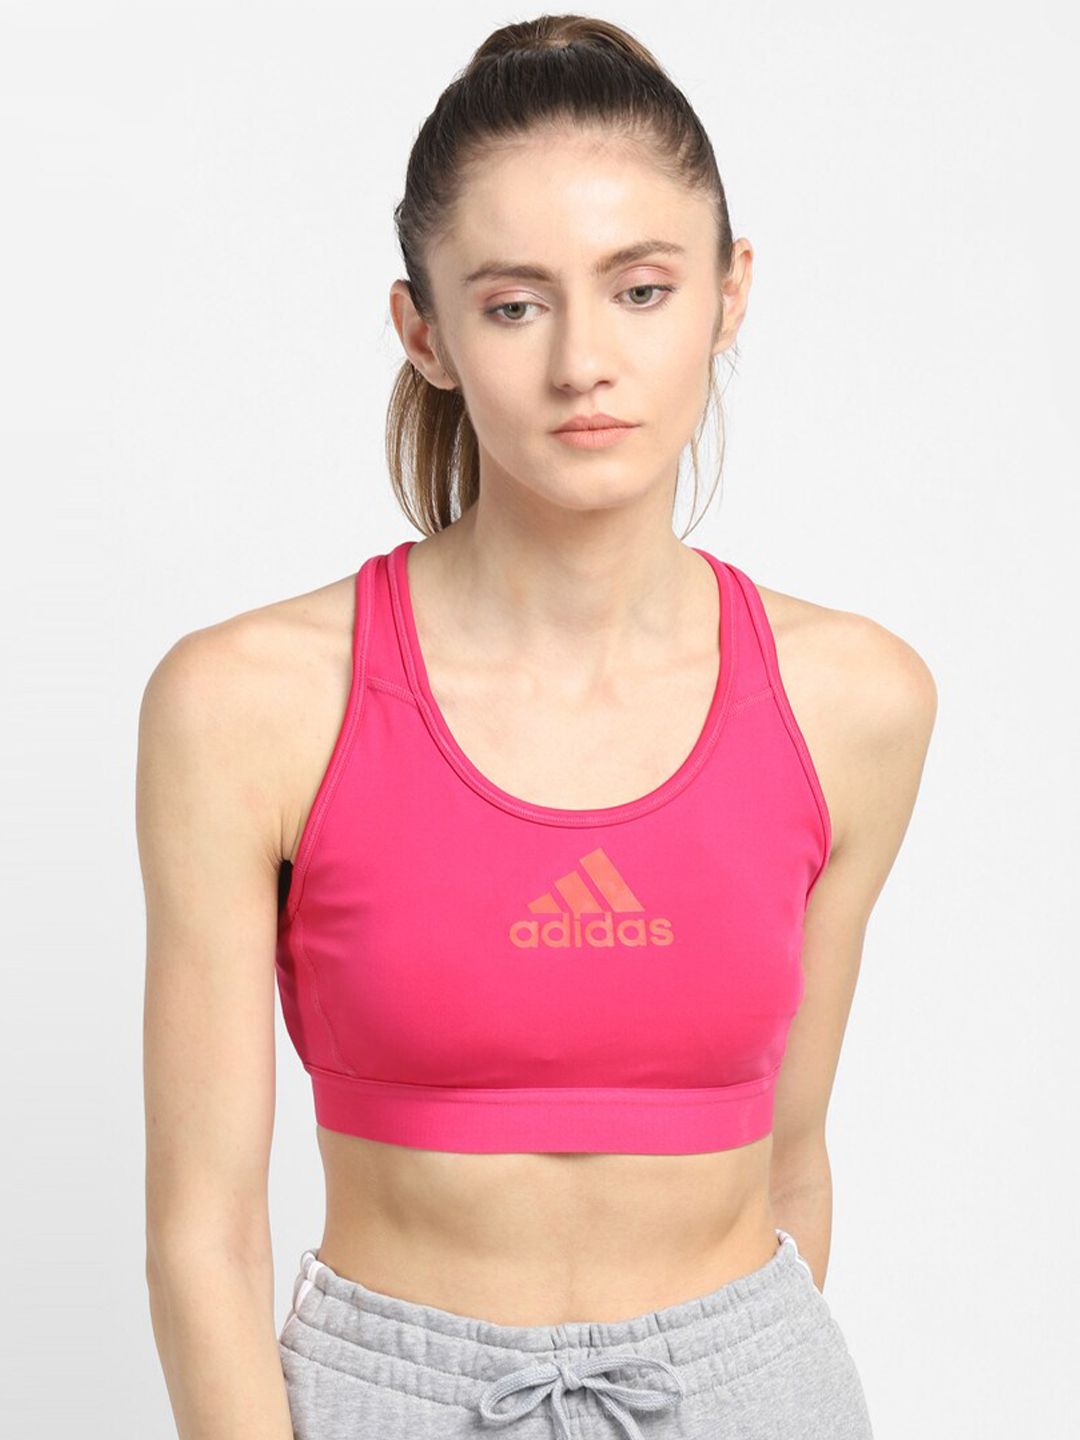 ADIDAS Pink Lightly Padded Workout Bra Price in India